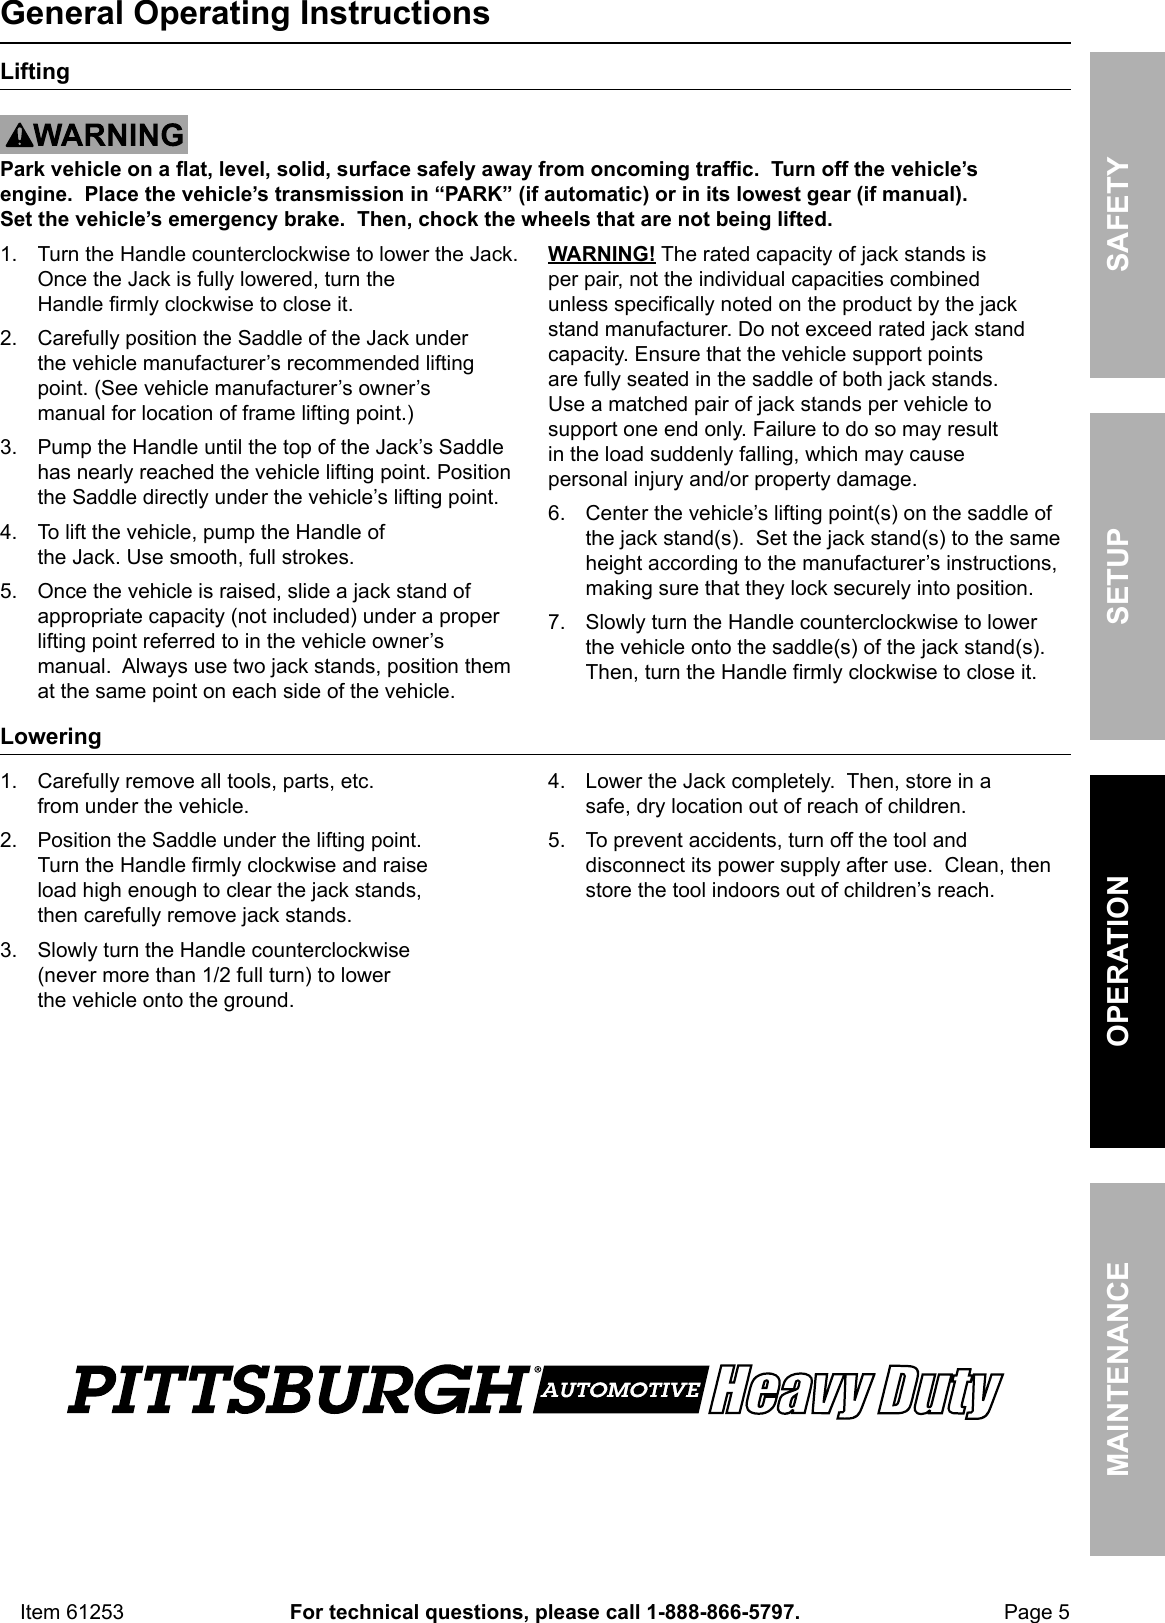 Page 5 of 8 - Manual For The 61253 3 Ton Low Profile Steel Heavy Duty Floor Jack With Rapid Pump®